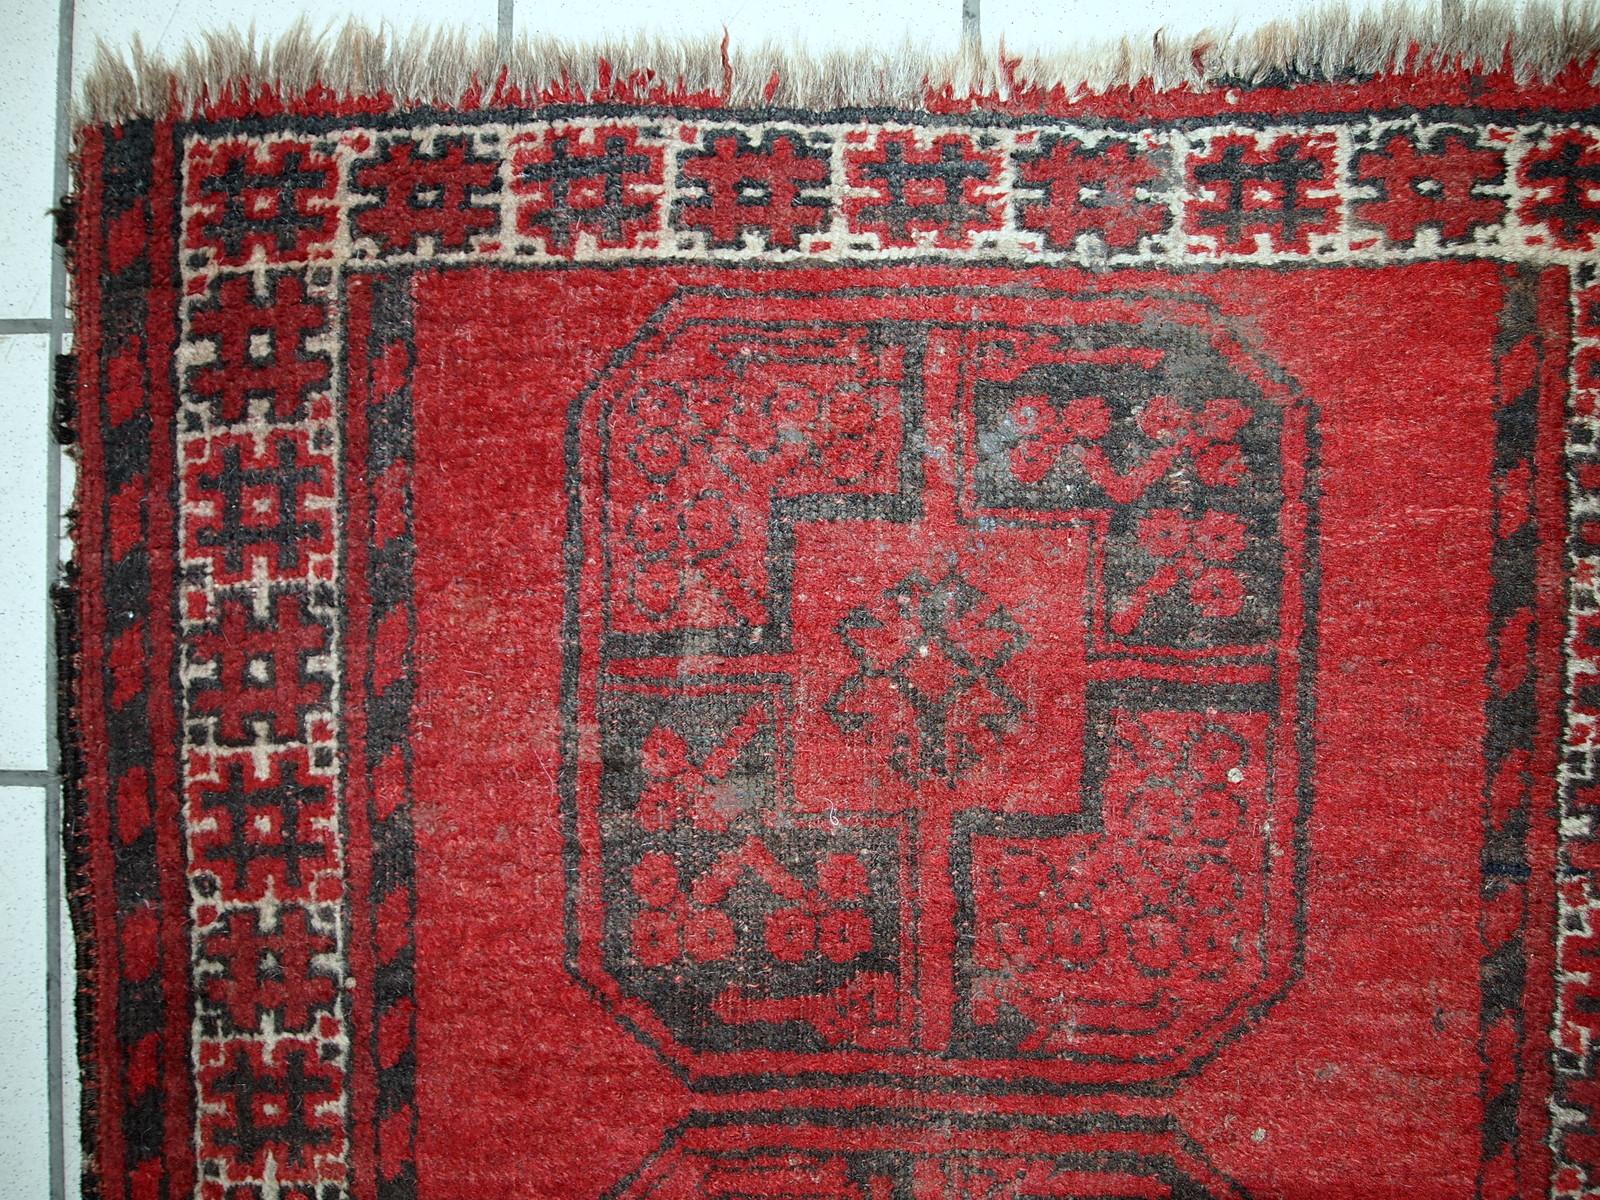 Handmade antique Afghan Ersari rug from the beginning of 20th century. This rug made in bright red wool.

Condition: original, some signs of age,

circa 1900s,

Size: 2.4' x 3' (75cm x 92cm),

Material: wool,

Country of origin: Middle